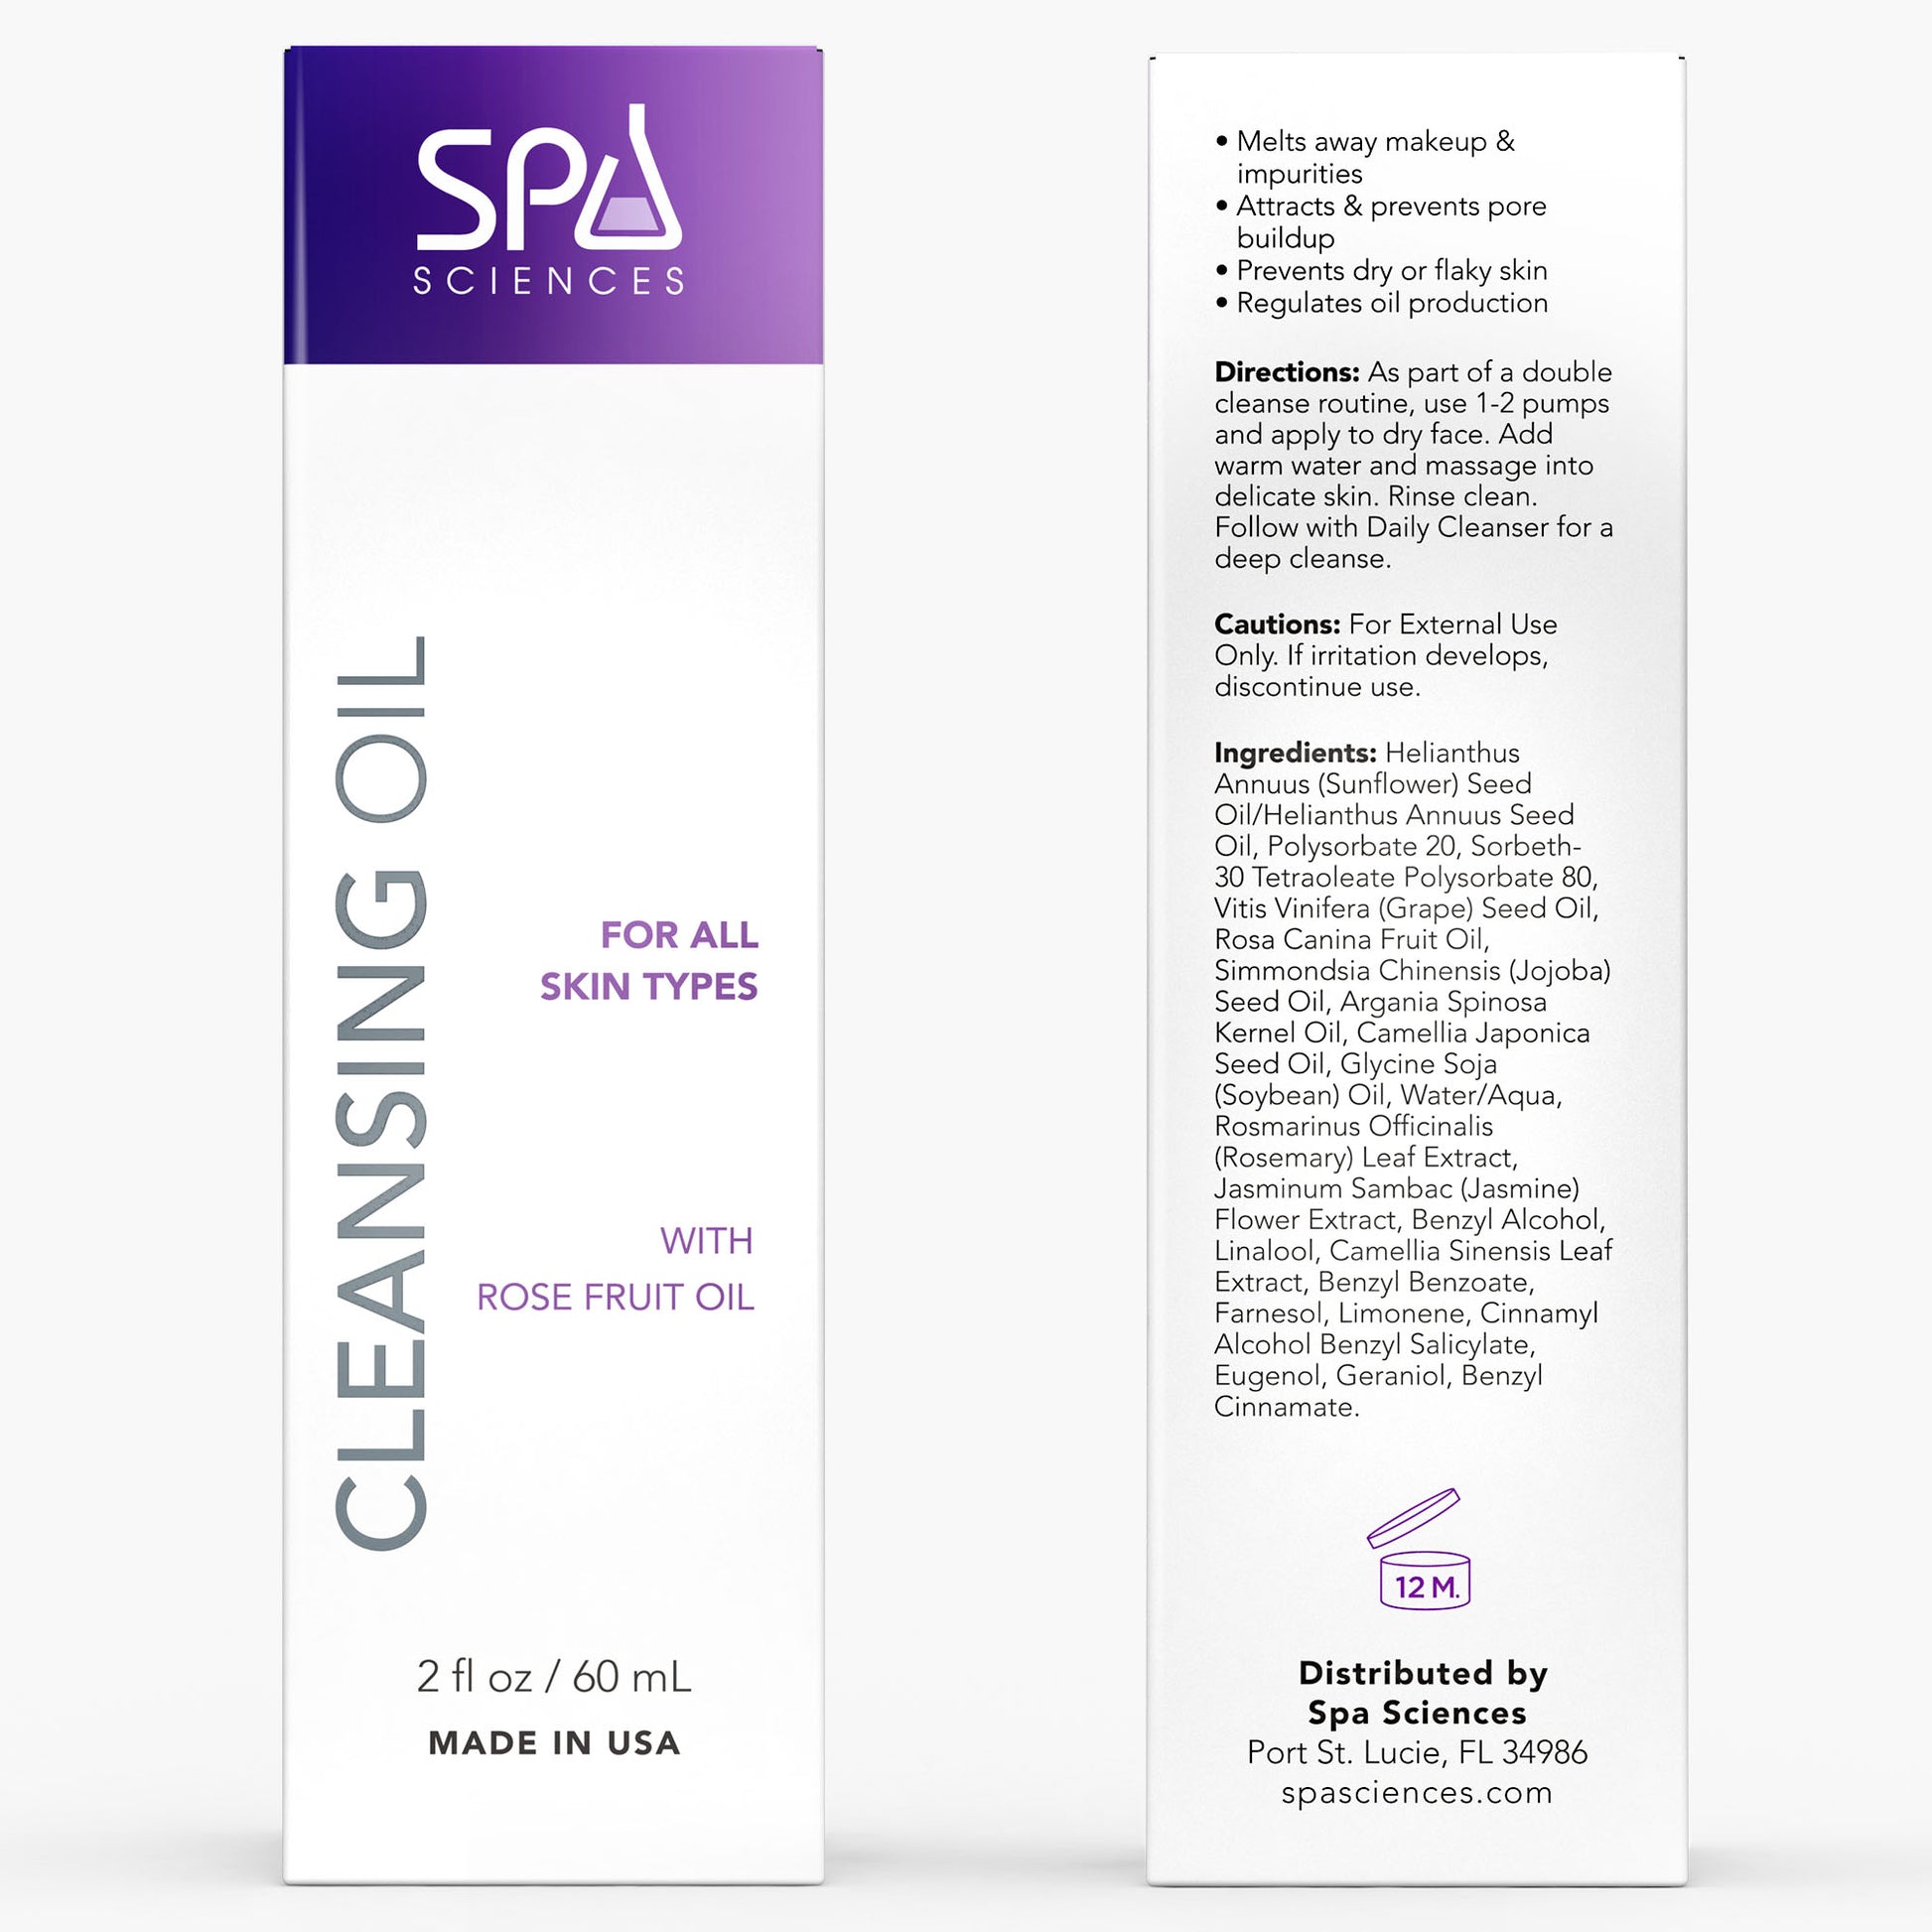 A bottle of Spa Sciences Super Cleanser on a white background.